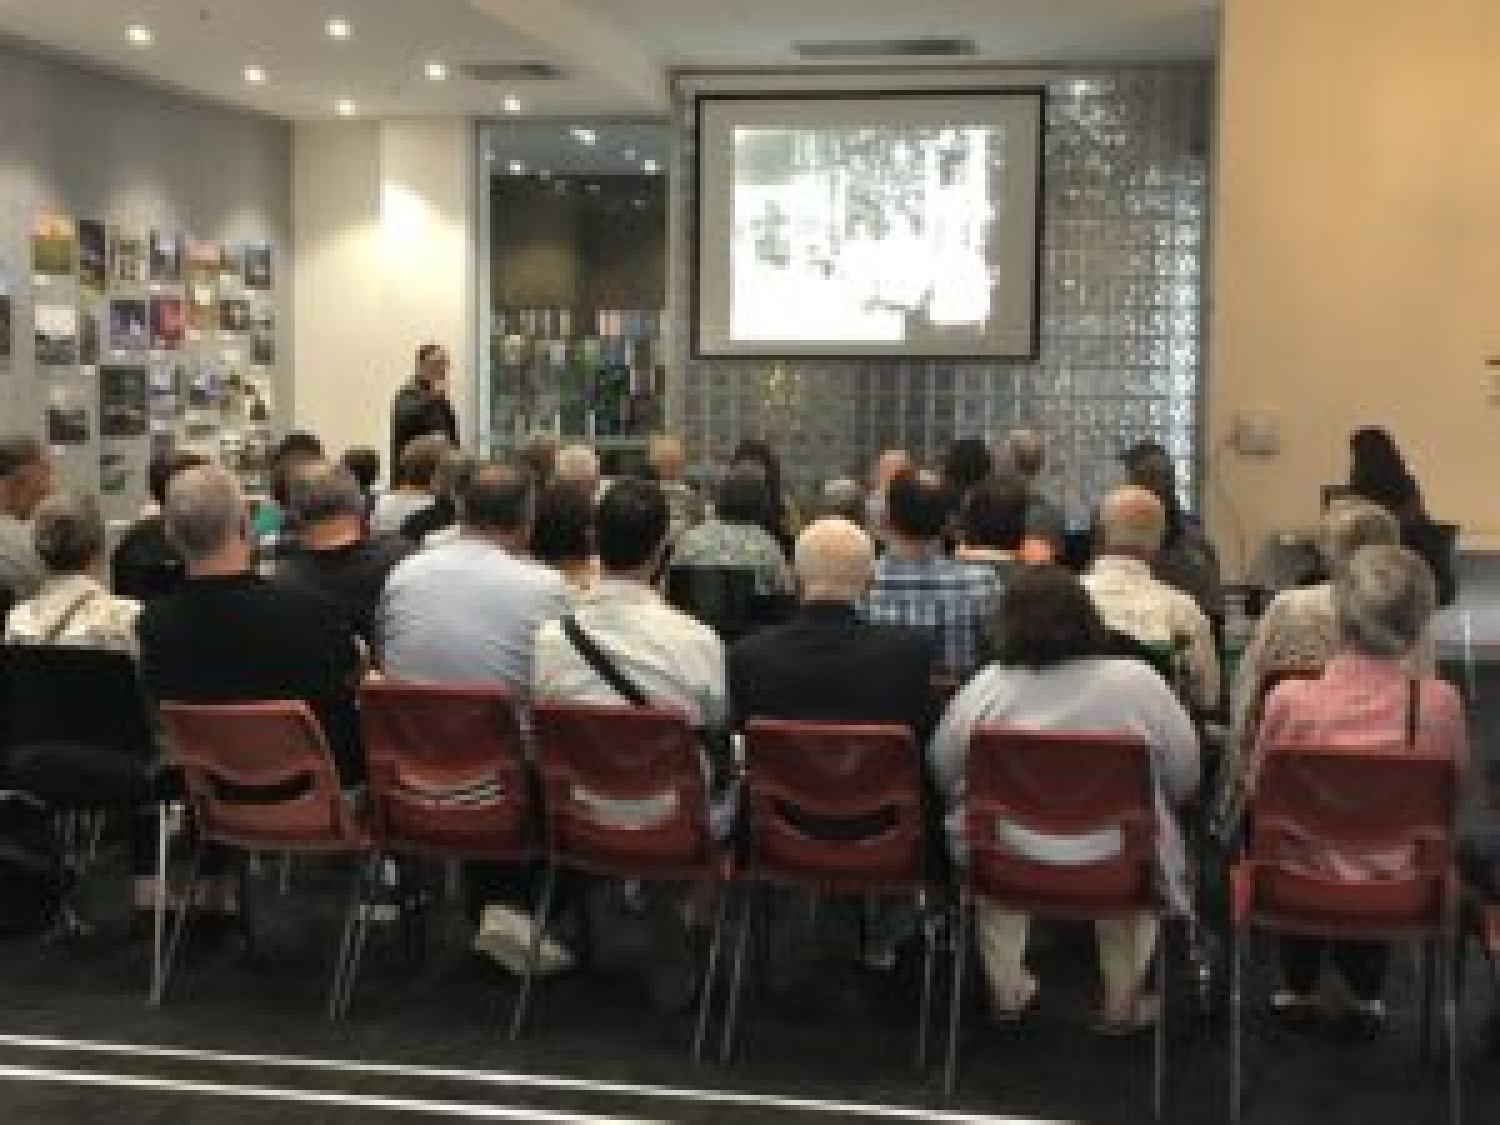 Focus Care clients attending a fantastic event at Campsie Library. Leonard Janiscewski chronicled the history of Greek cafes and milk bars in Australia.